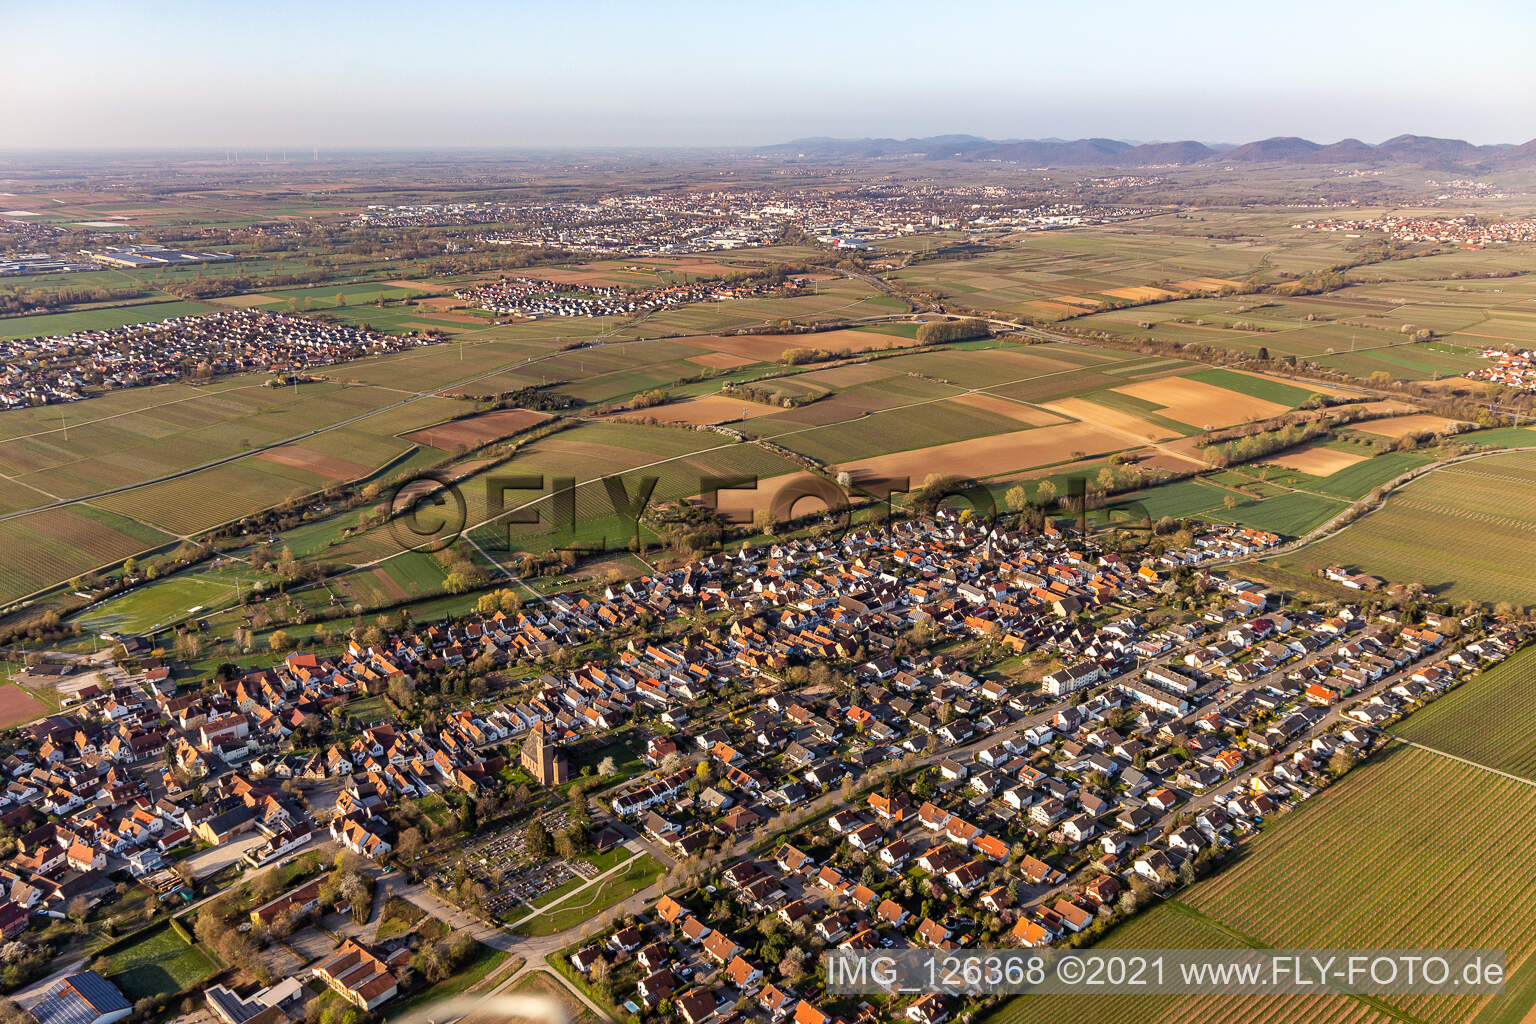 Essingen in the state Rhineland-Palatinate, Germany viewn from the air